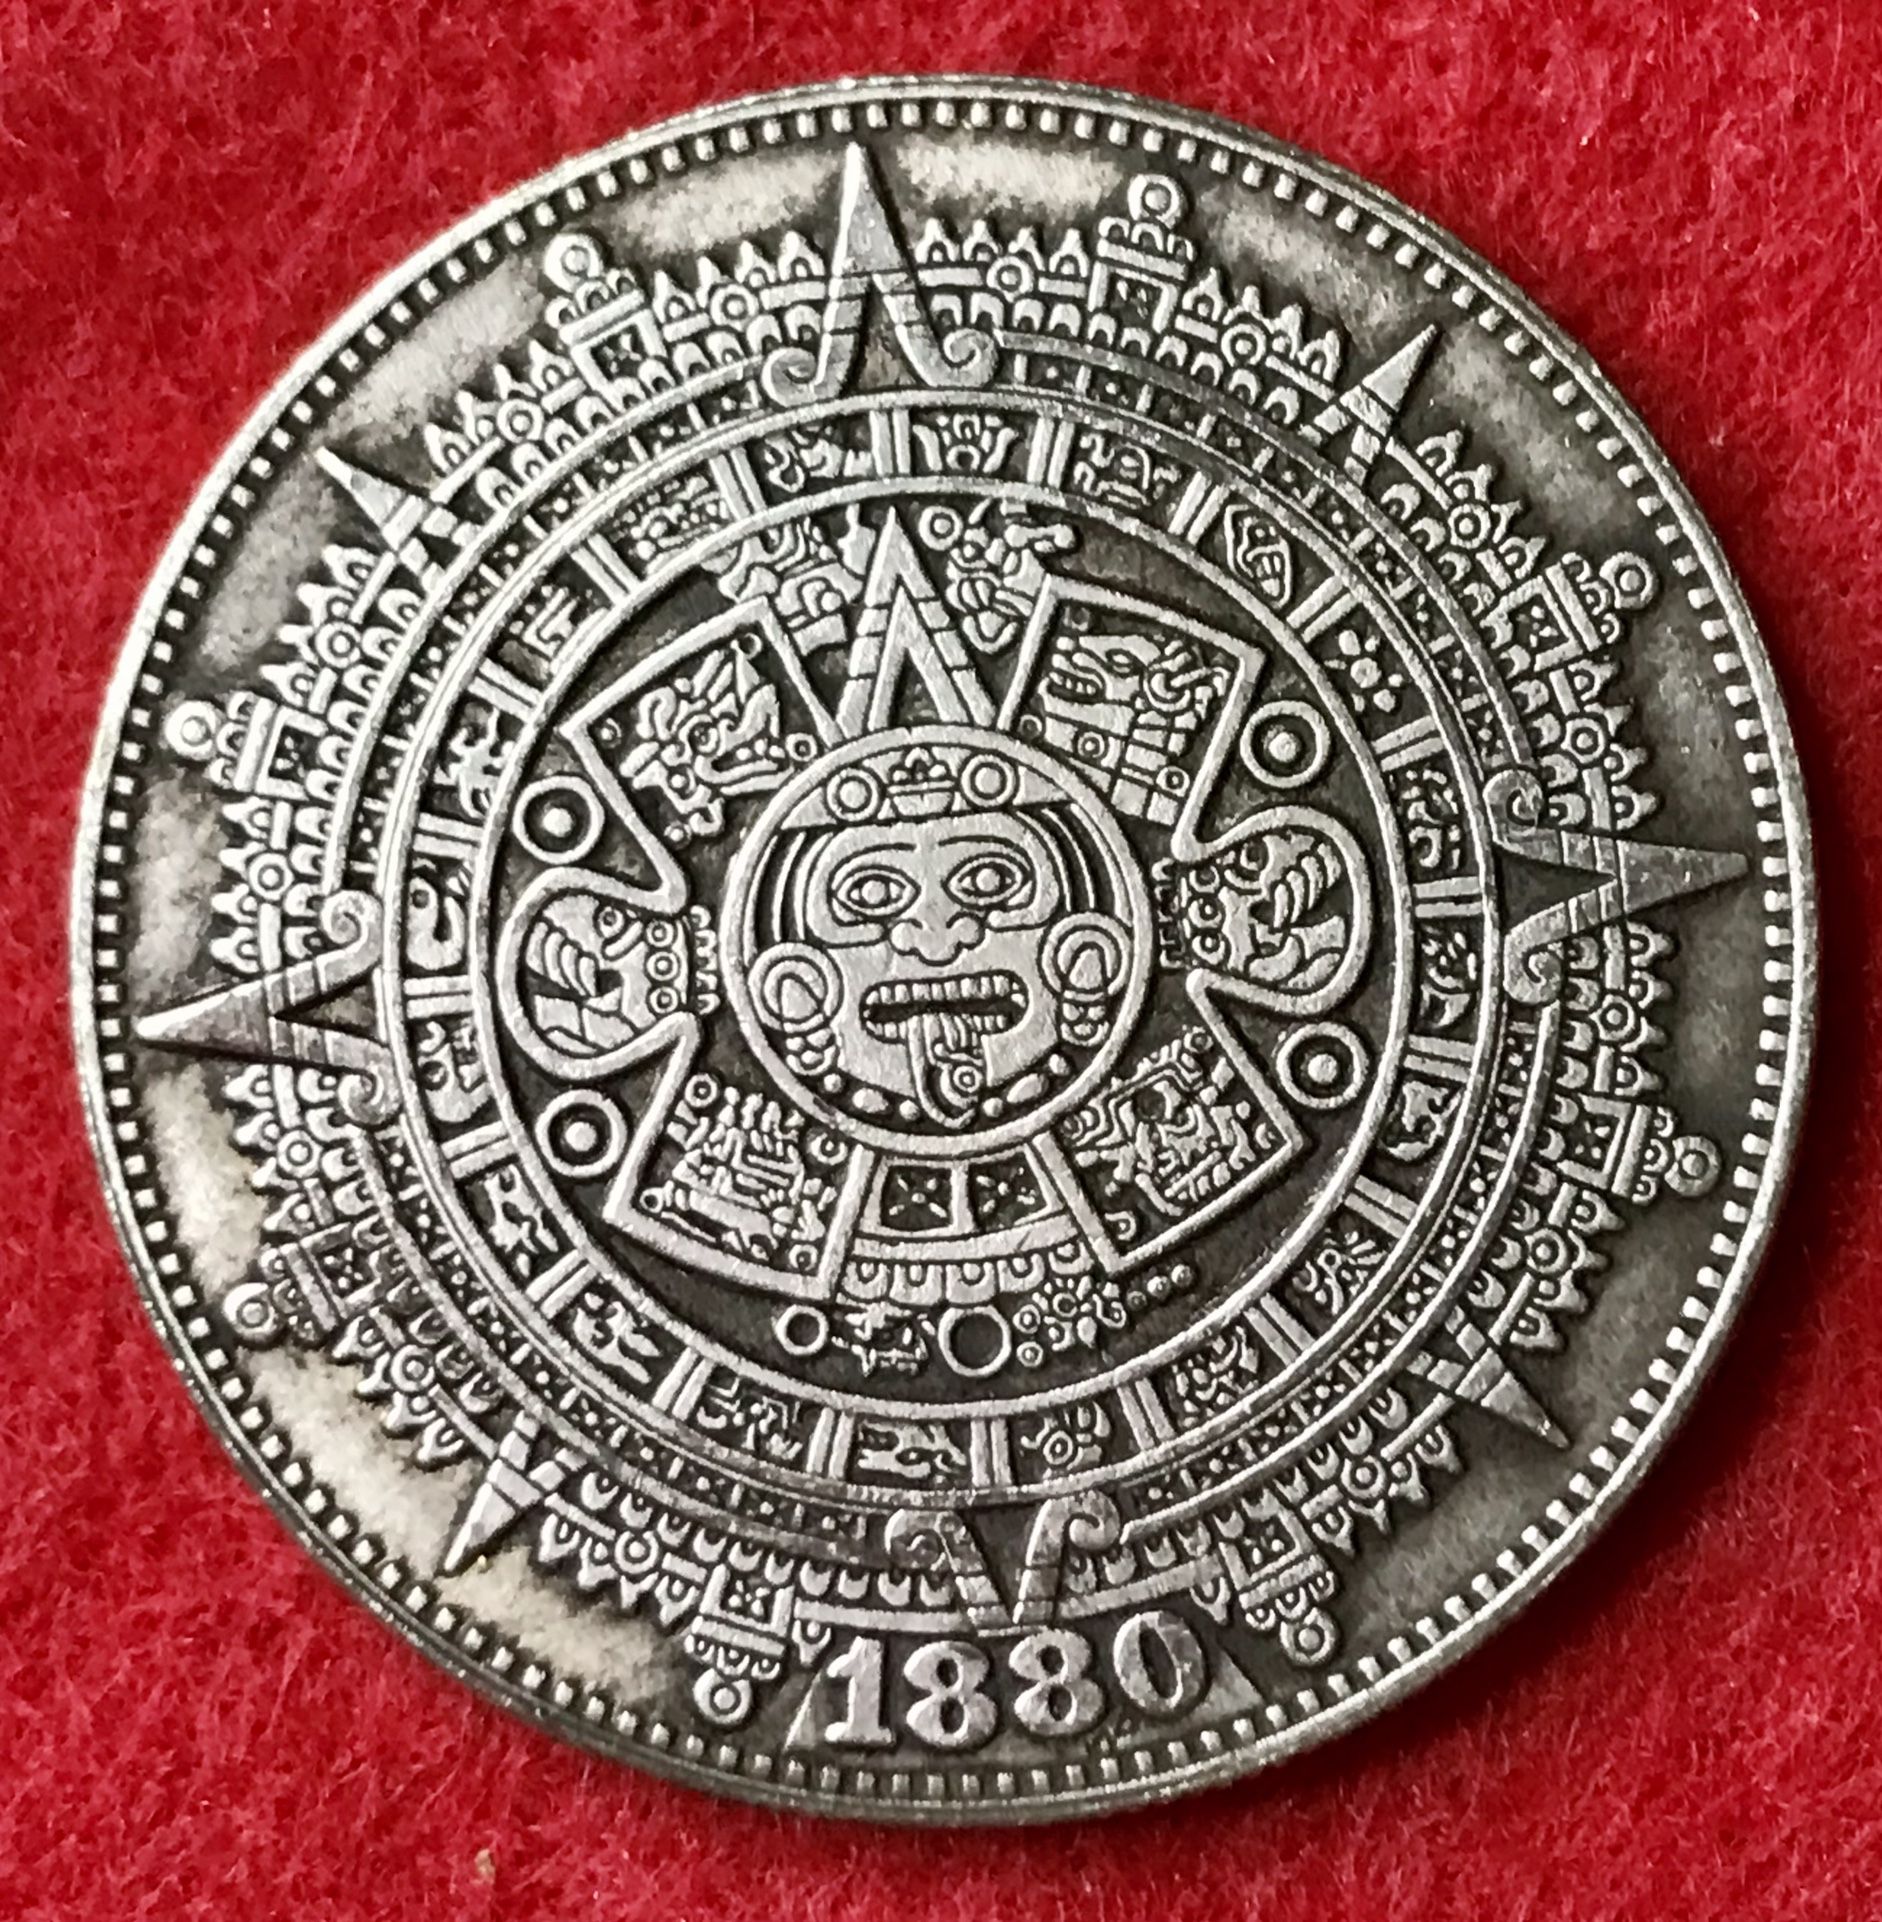 Aztec Calendar Highly Detailed Tibetan Silver Coin. First $20 Offer Automatically Accepted. Shipped Same Day